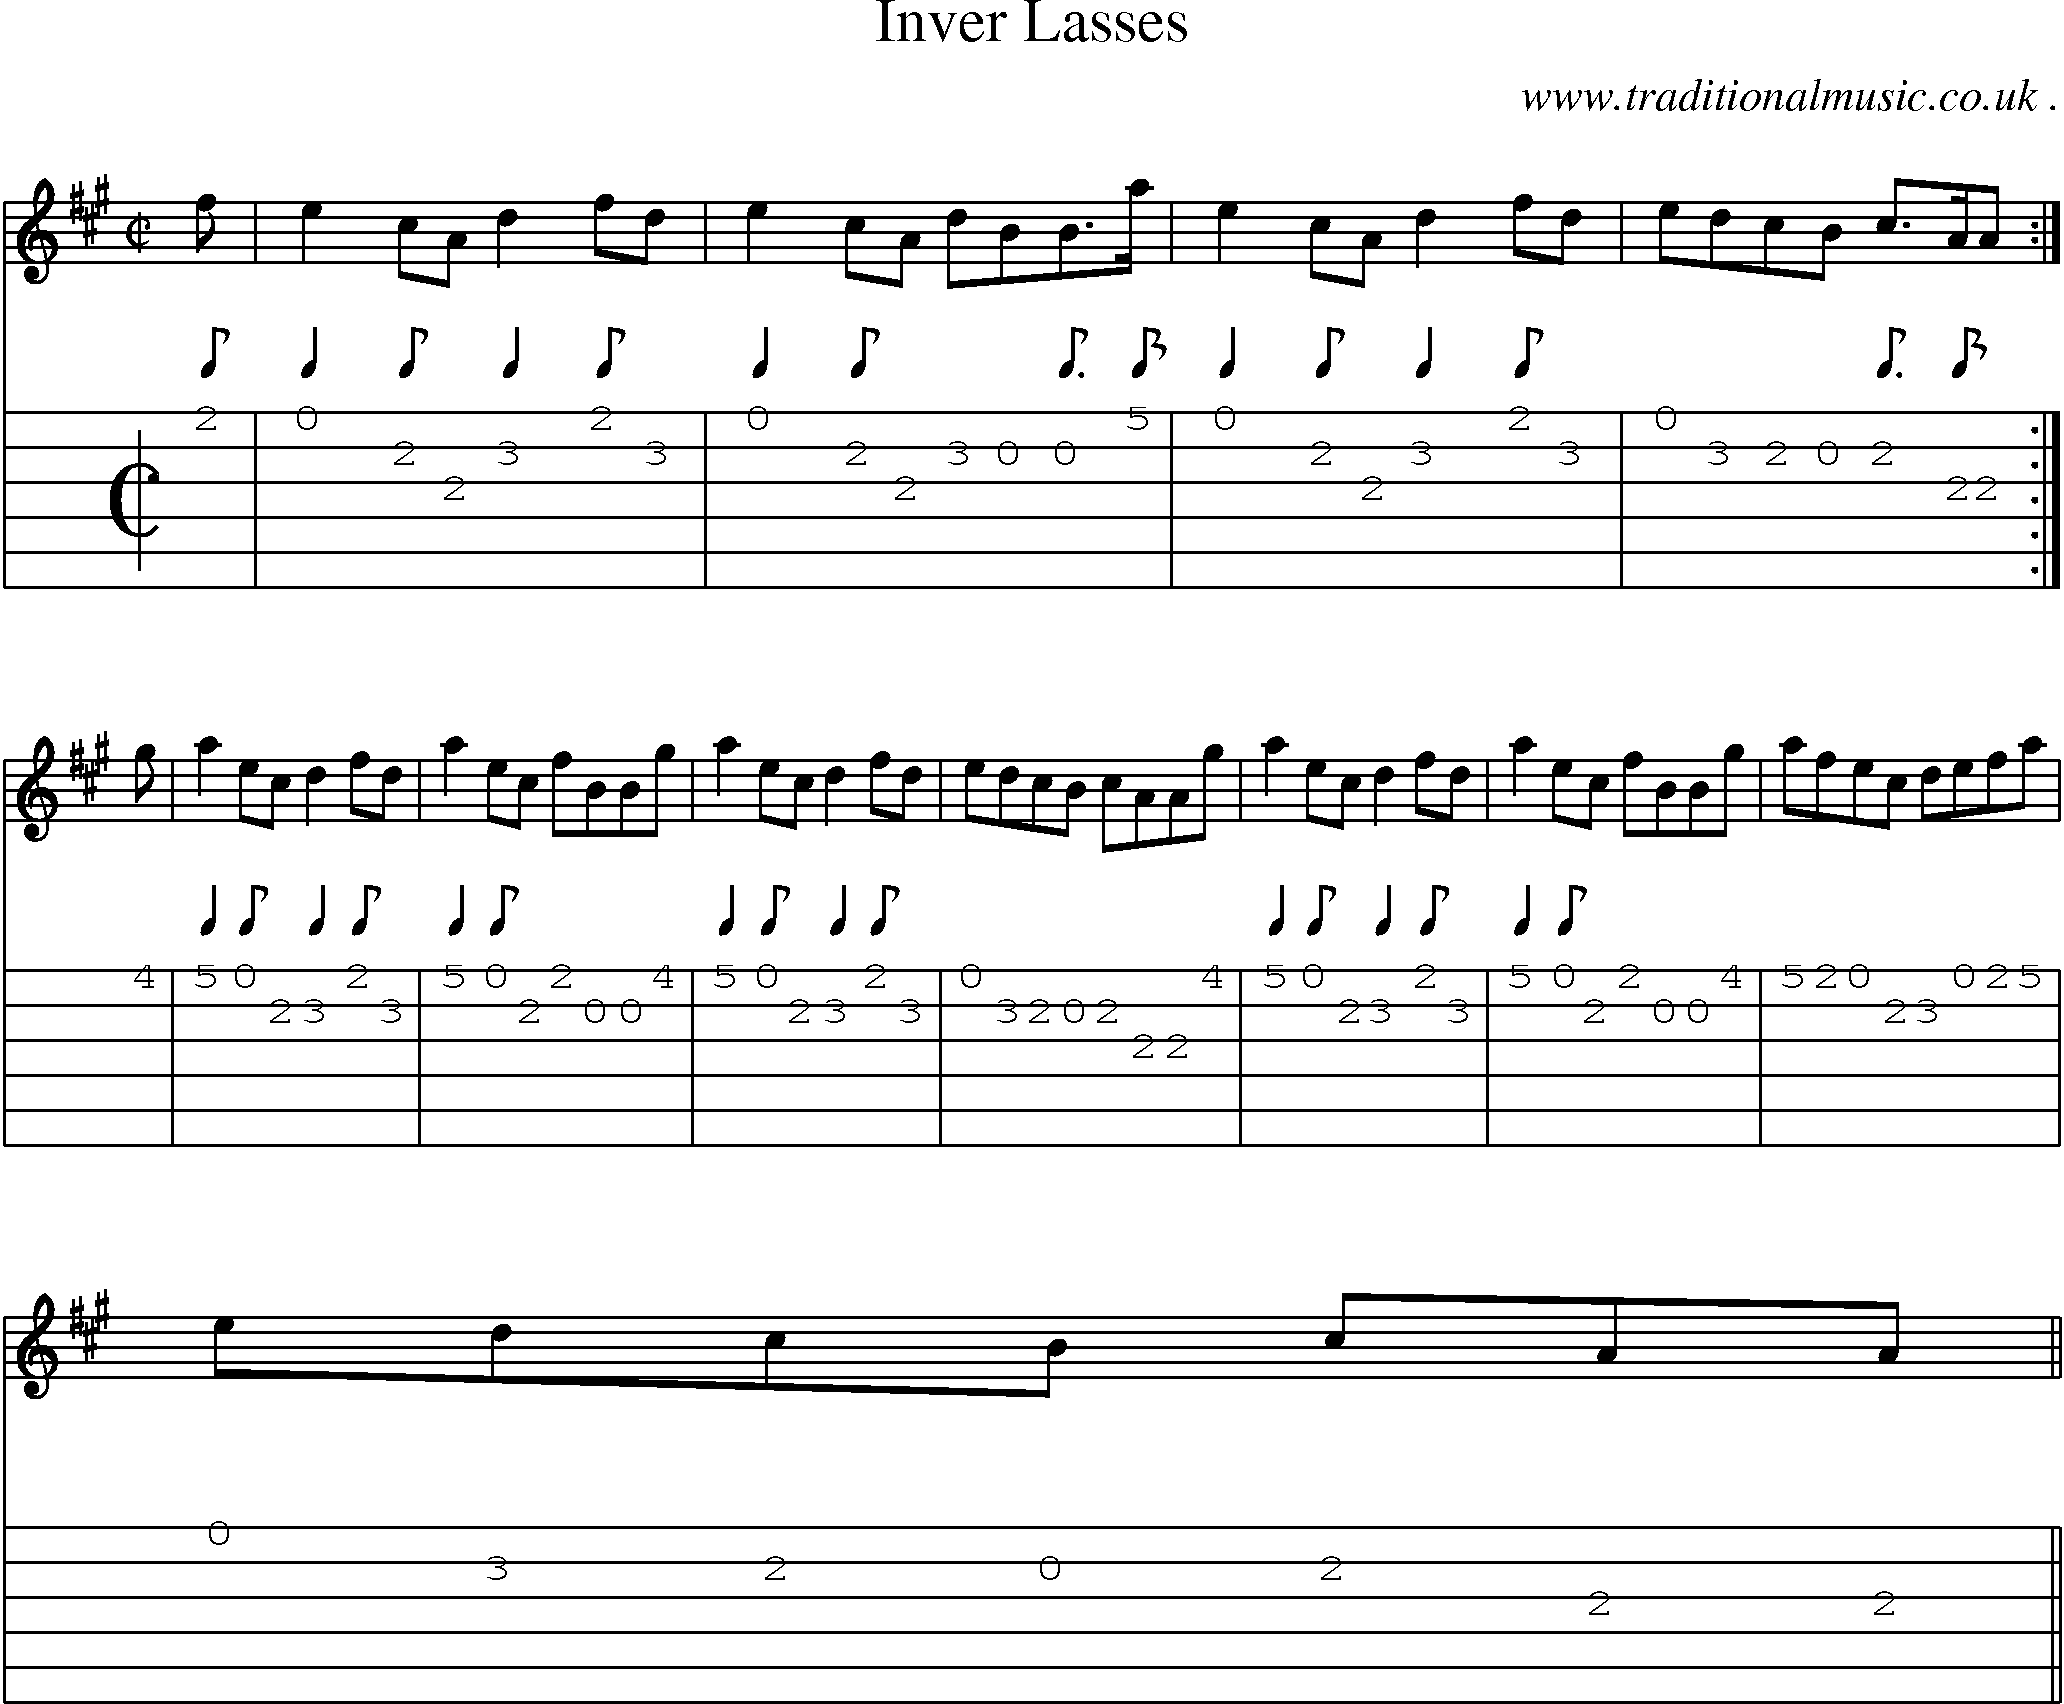 Sheet-music  score, Chords and Guitar Tabs for Inver Lasses